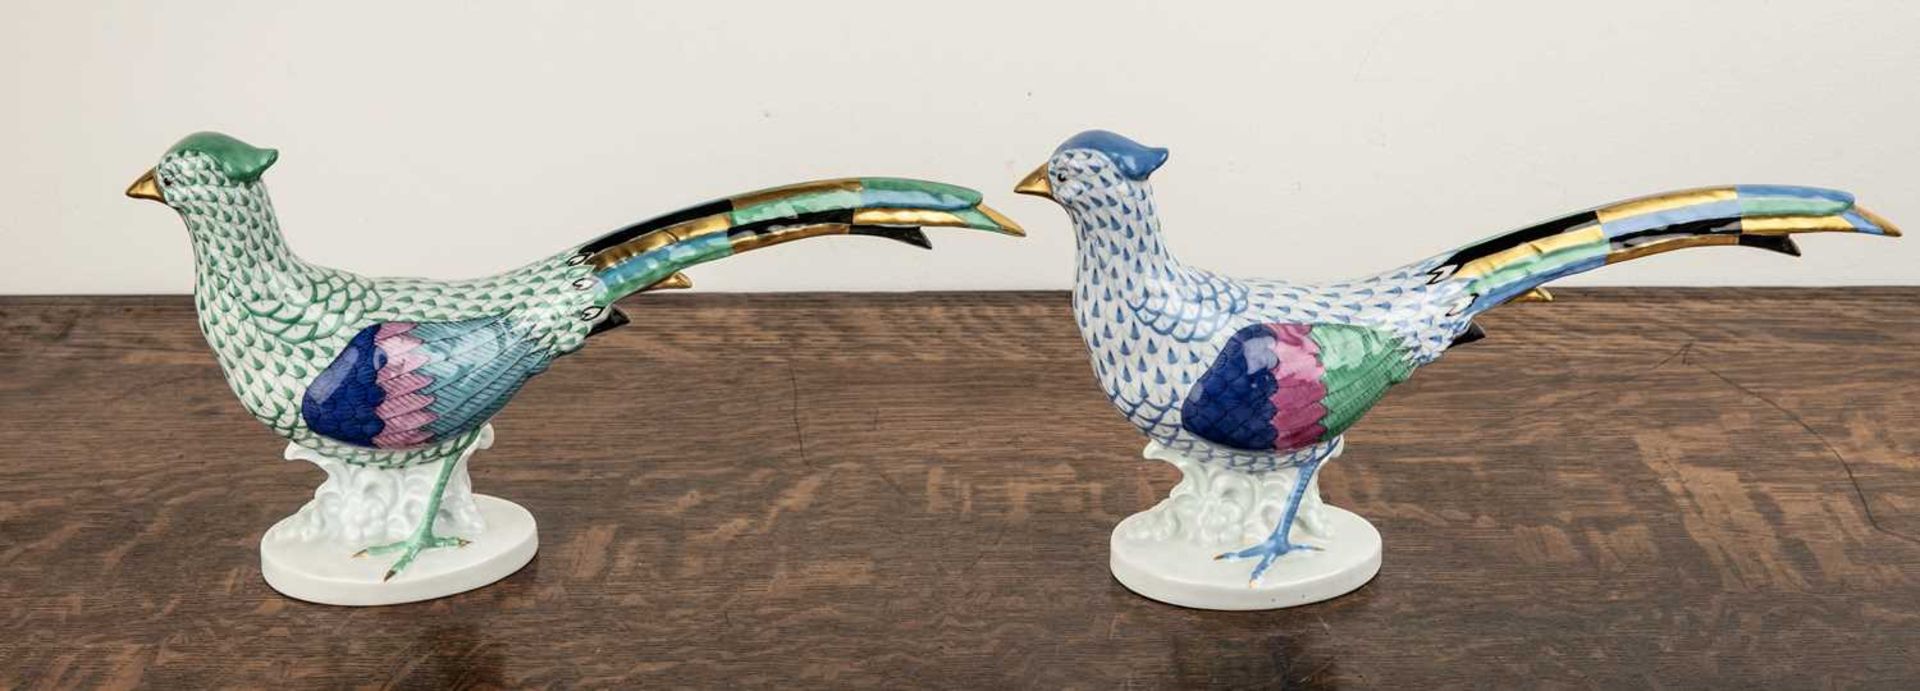 Pair of Herend porcelain pheasants decorated mainly in blue and green, with gilt highlights, printed - Image 2 of 3